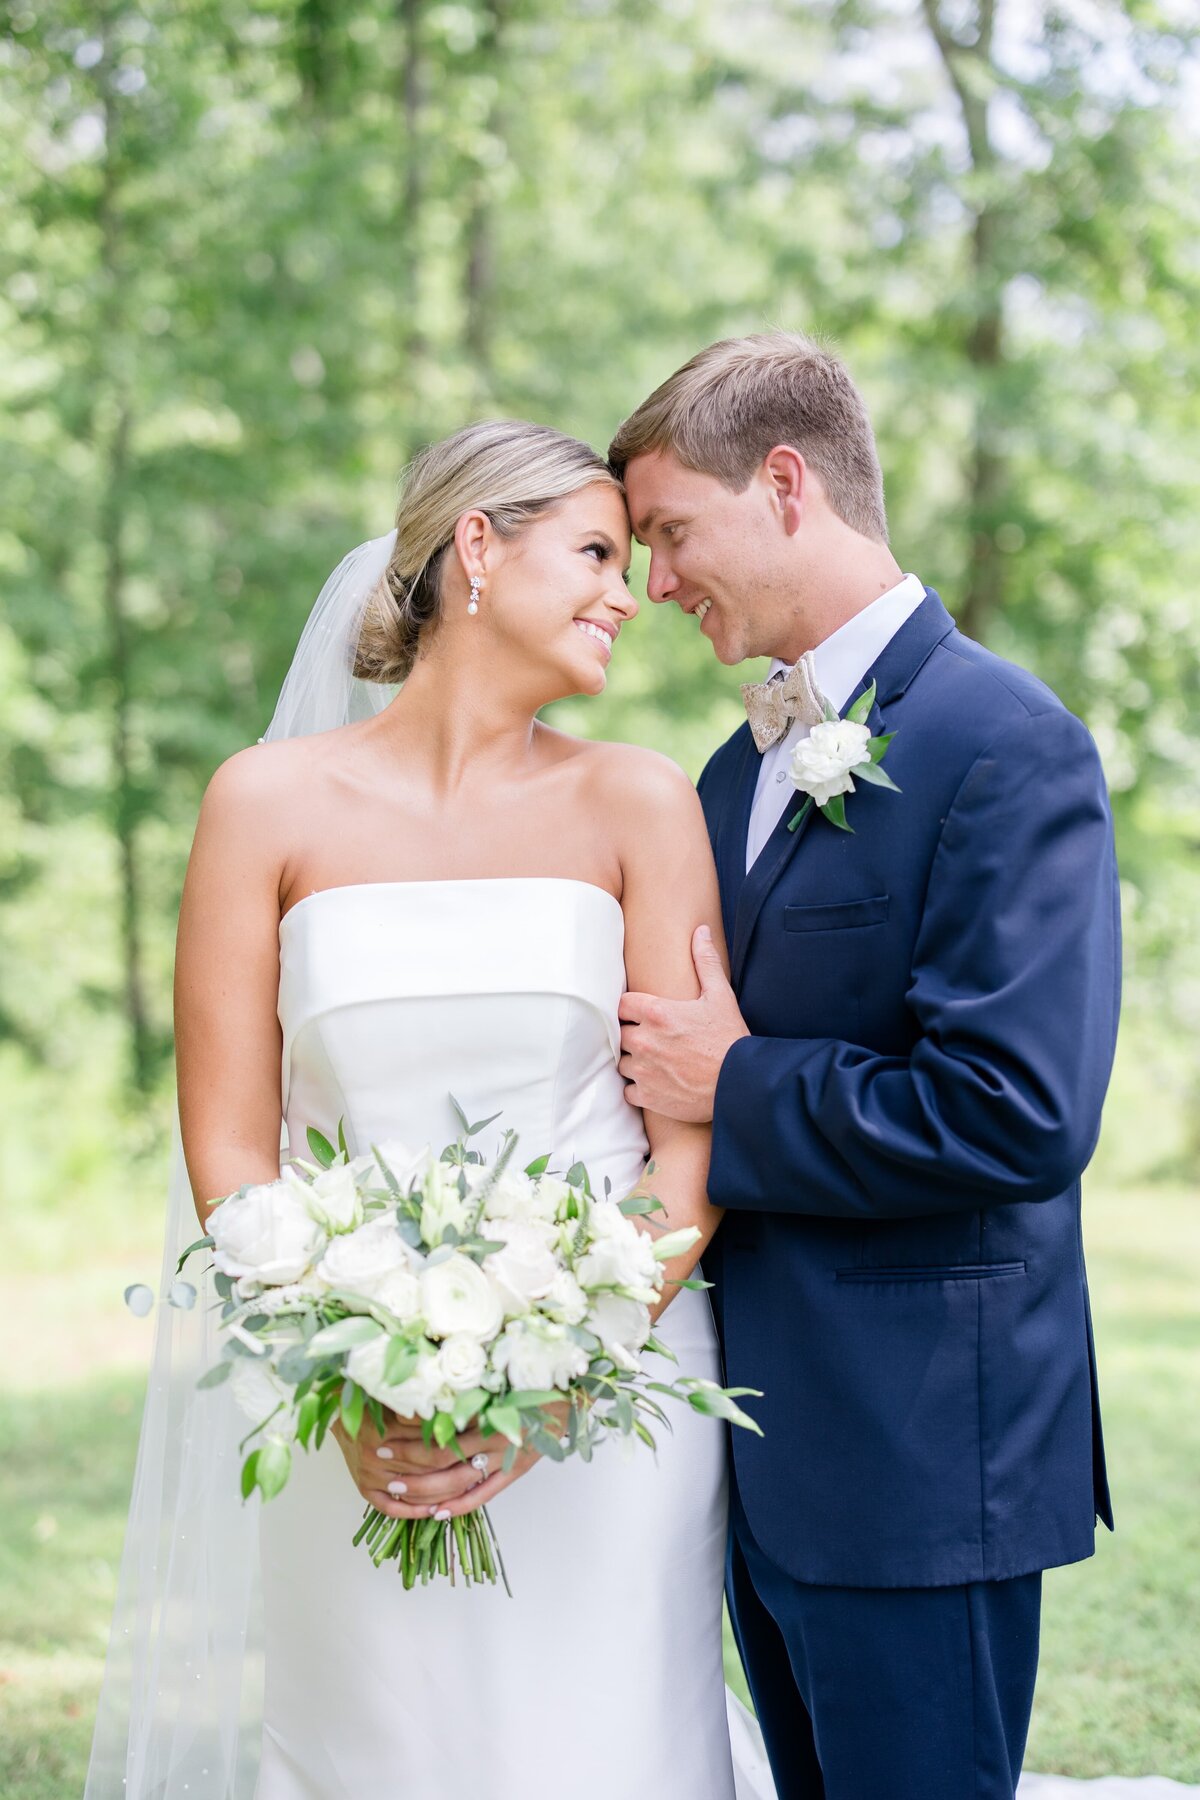 katie_and_alec_wedding_photography_wedding_videography_birmingham_alabama_husband_and_wife_team_photo_video_weddings_engagement_engagements_light_airy_focused_on_marriage__legacy_at_serenity_farms_wedding_97